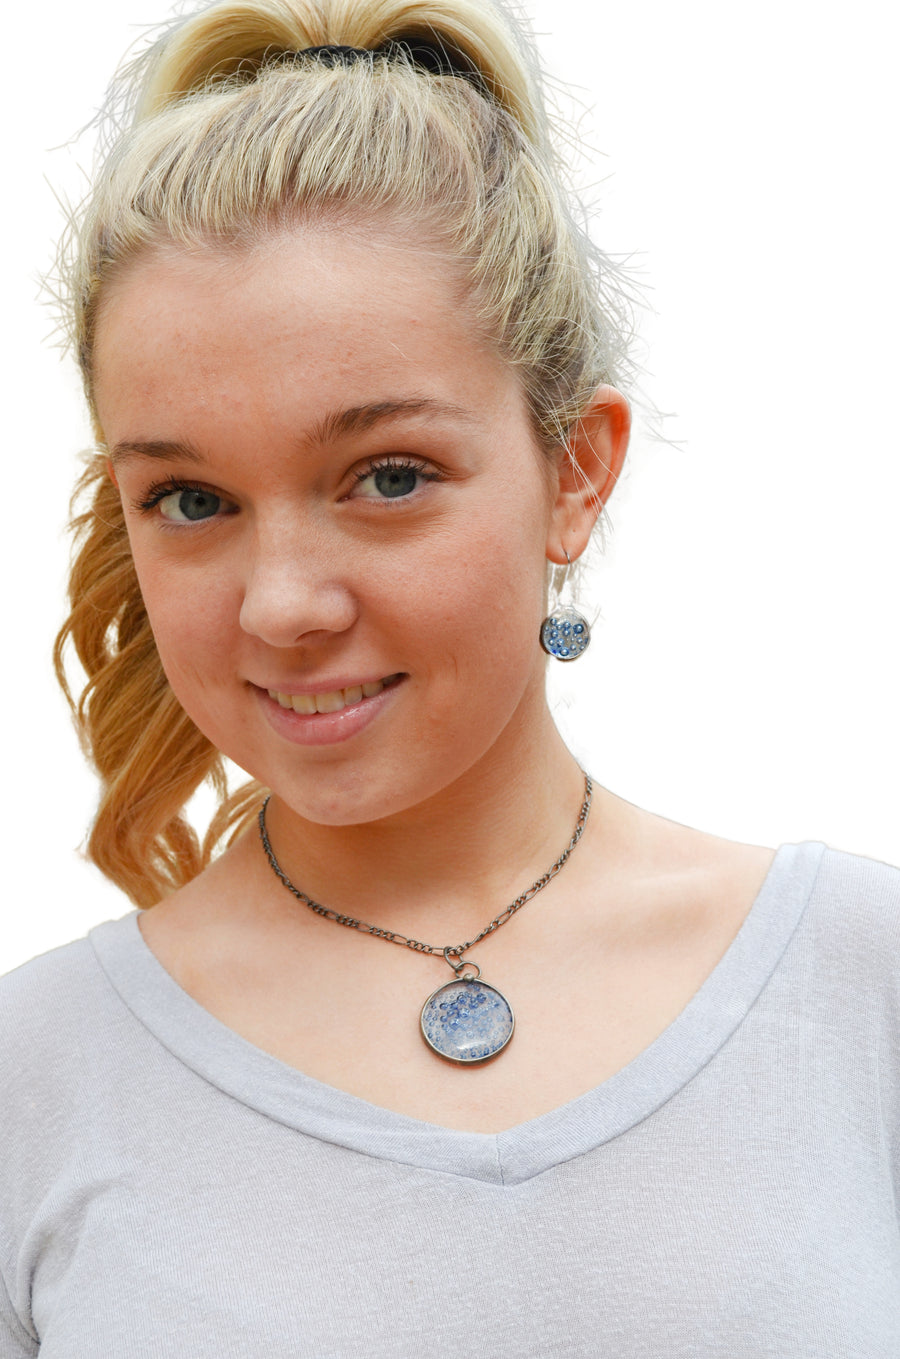 Model wearing both the Blue Bubble Dot Earrings and Pendant. Truly Handmade in USA by Louisiana Artisan at Bayou Glass Arts Studio.